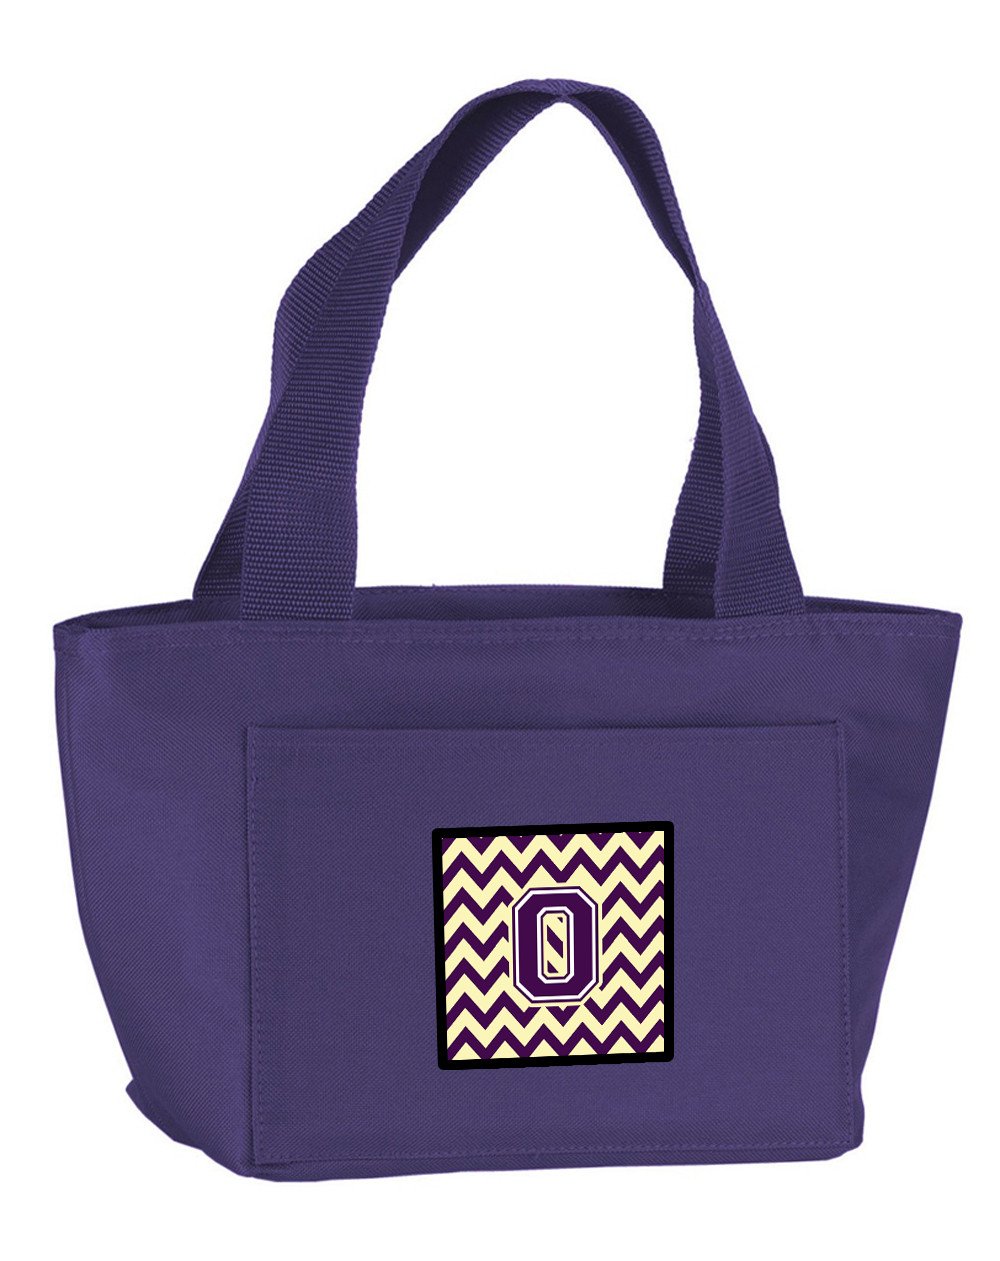 Letter O Chevron Purple and Gold Lunch Bag CJ1058-OPR-8808 by Caroline's Treasures